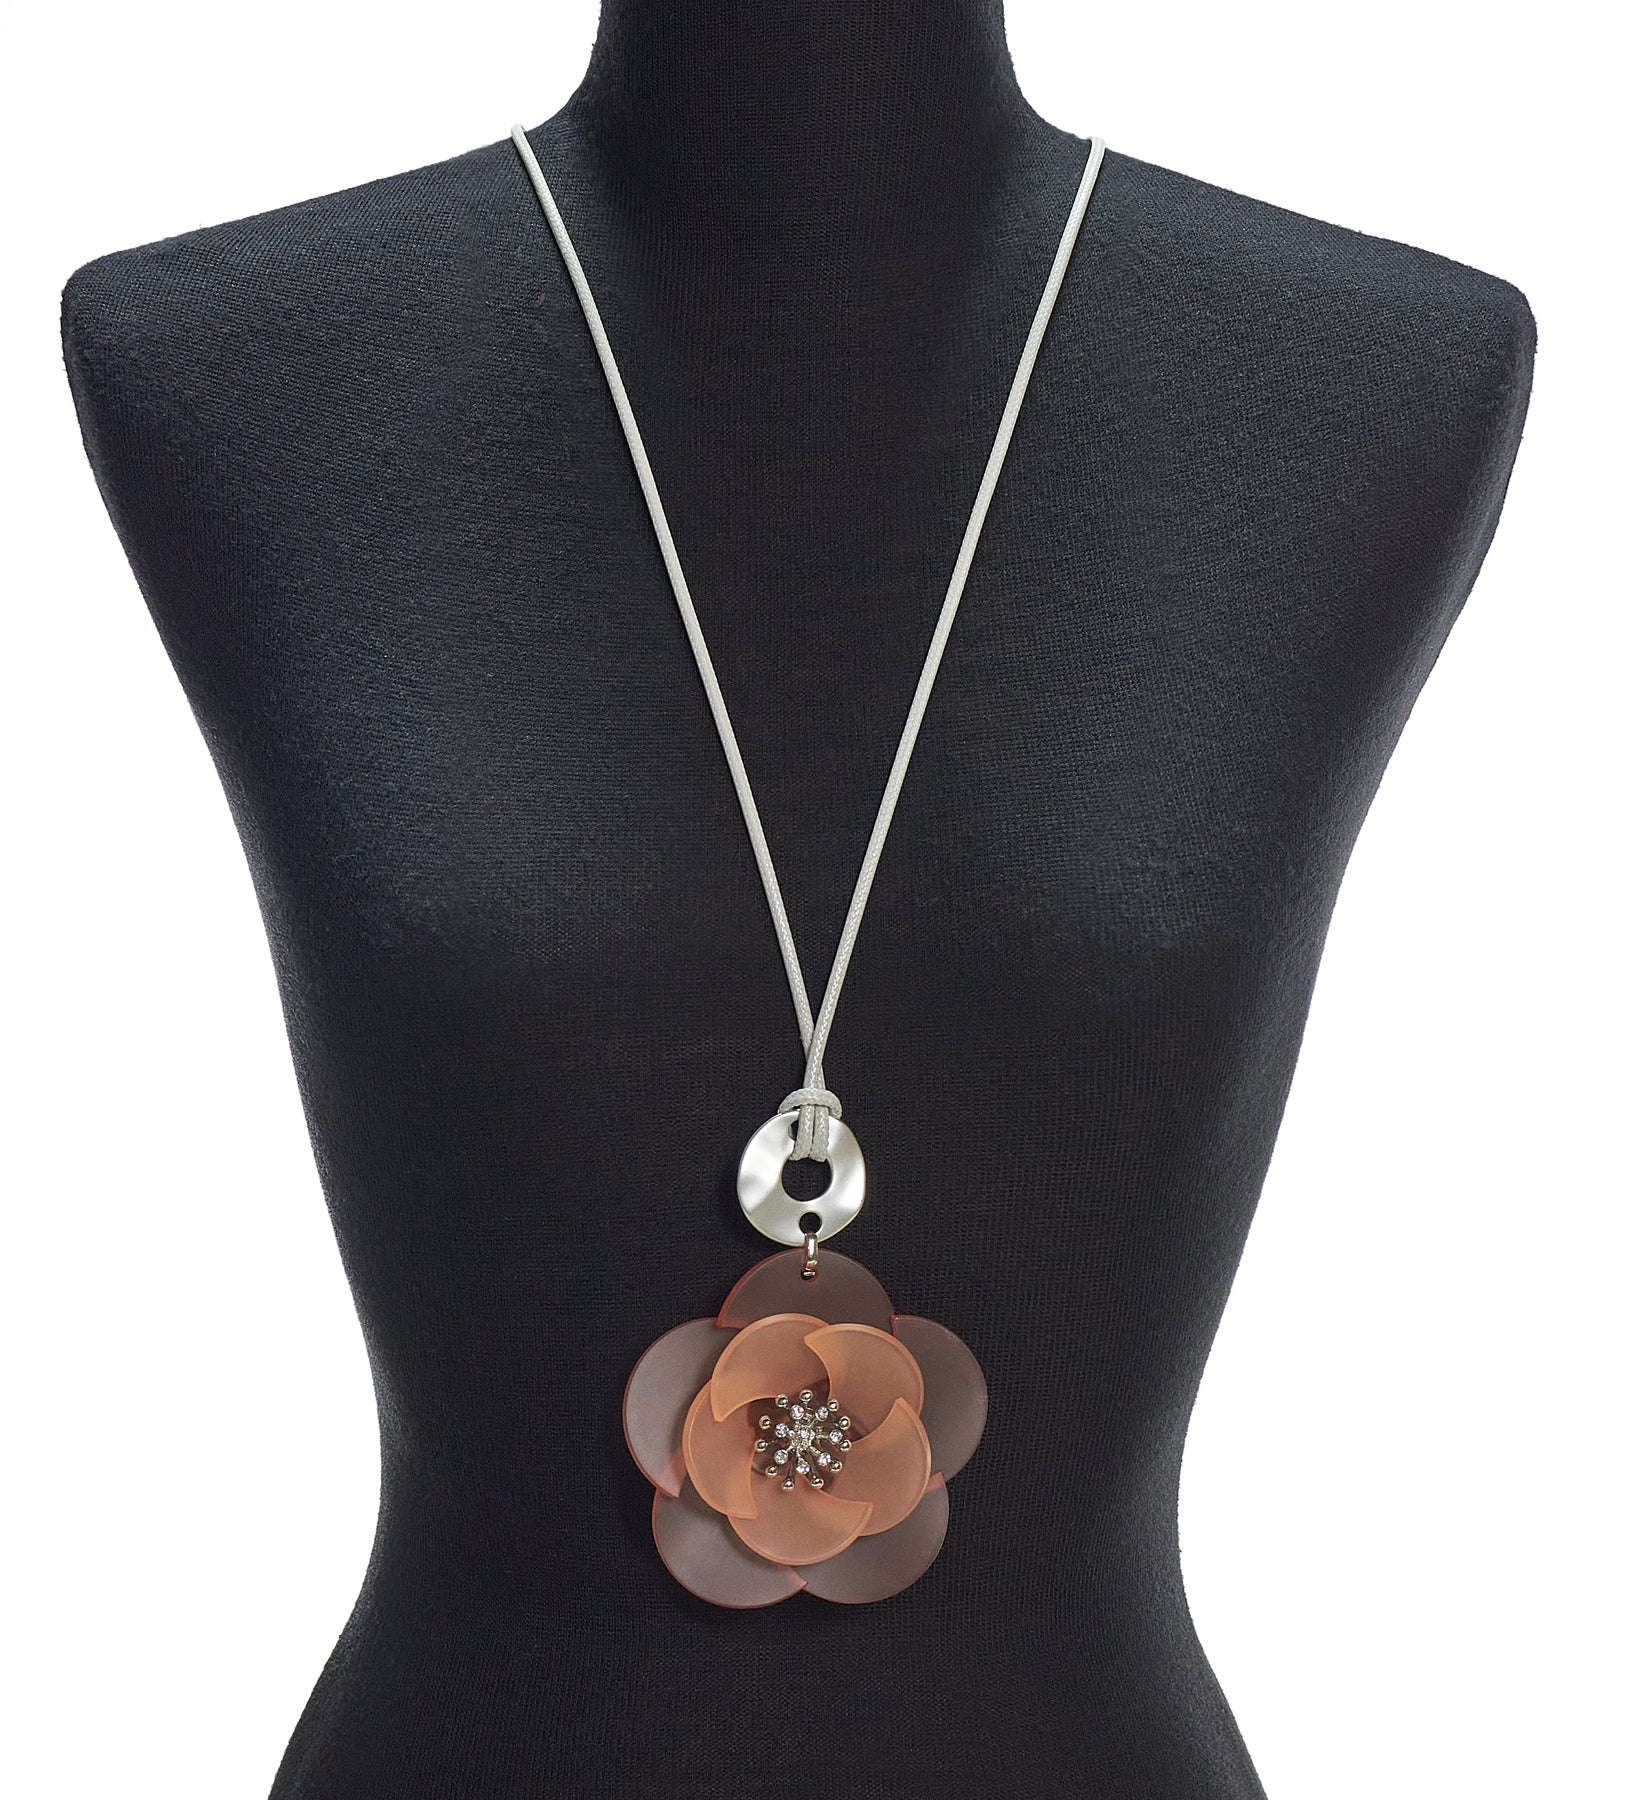 Les Nana Pendent Necklace-Buy Les Nana Accessories Online-Women's Jewelry Online Canada